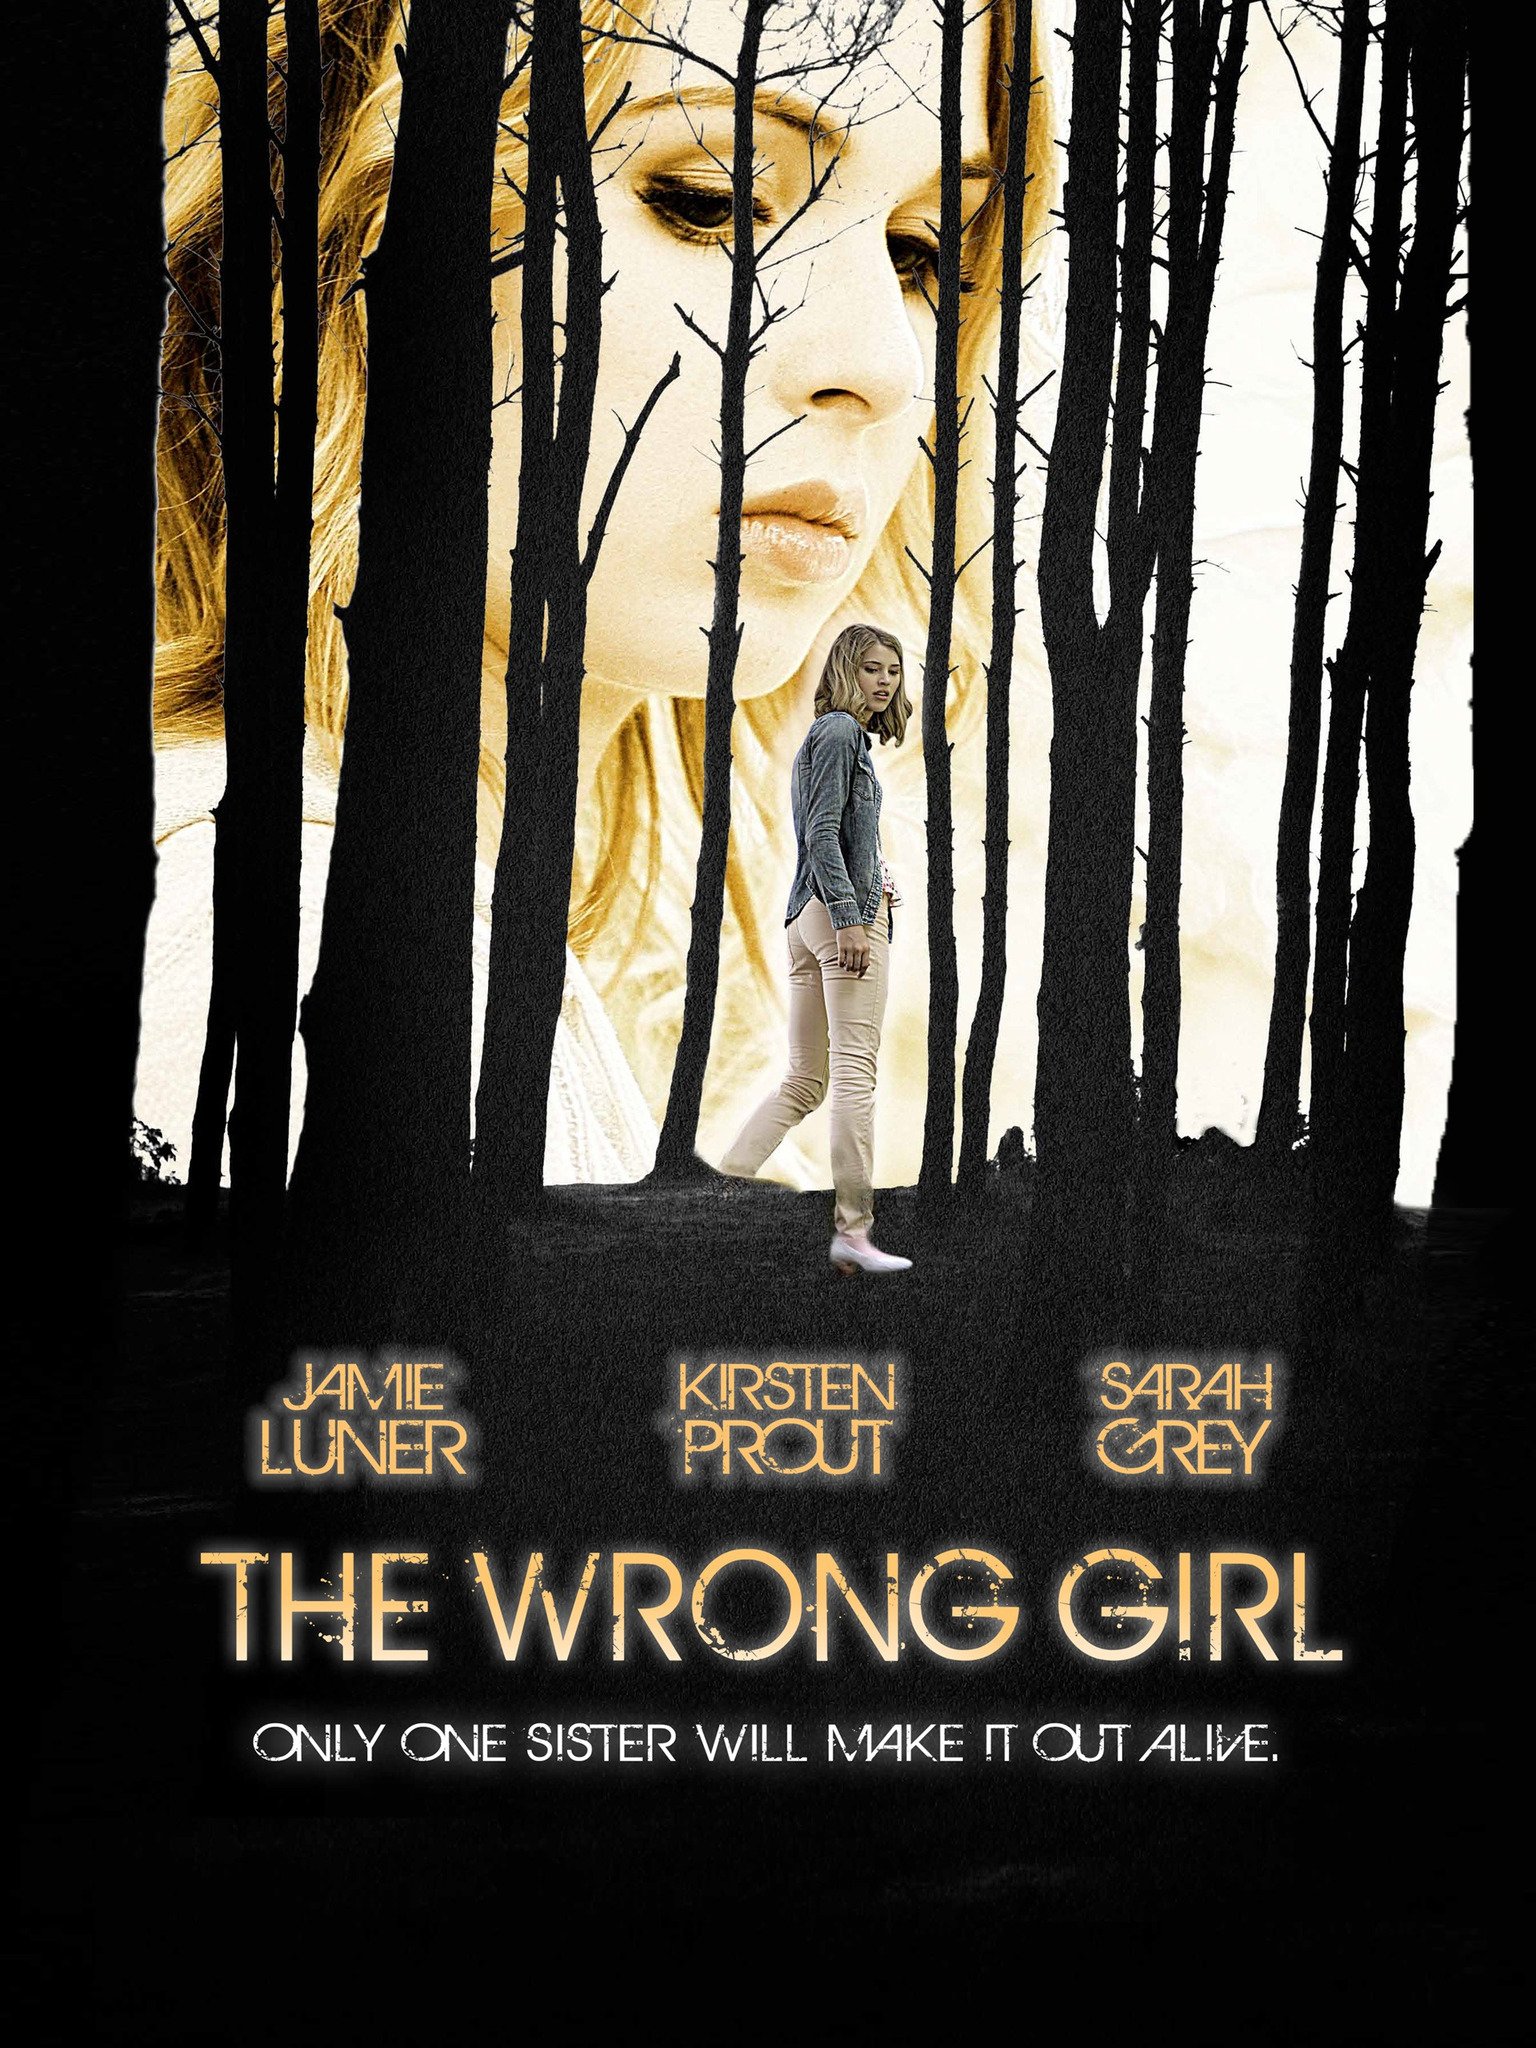 The Wrong Girl by C.J. Archer